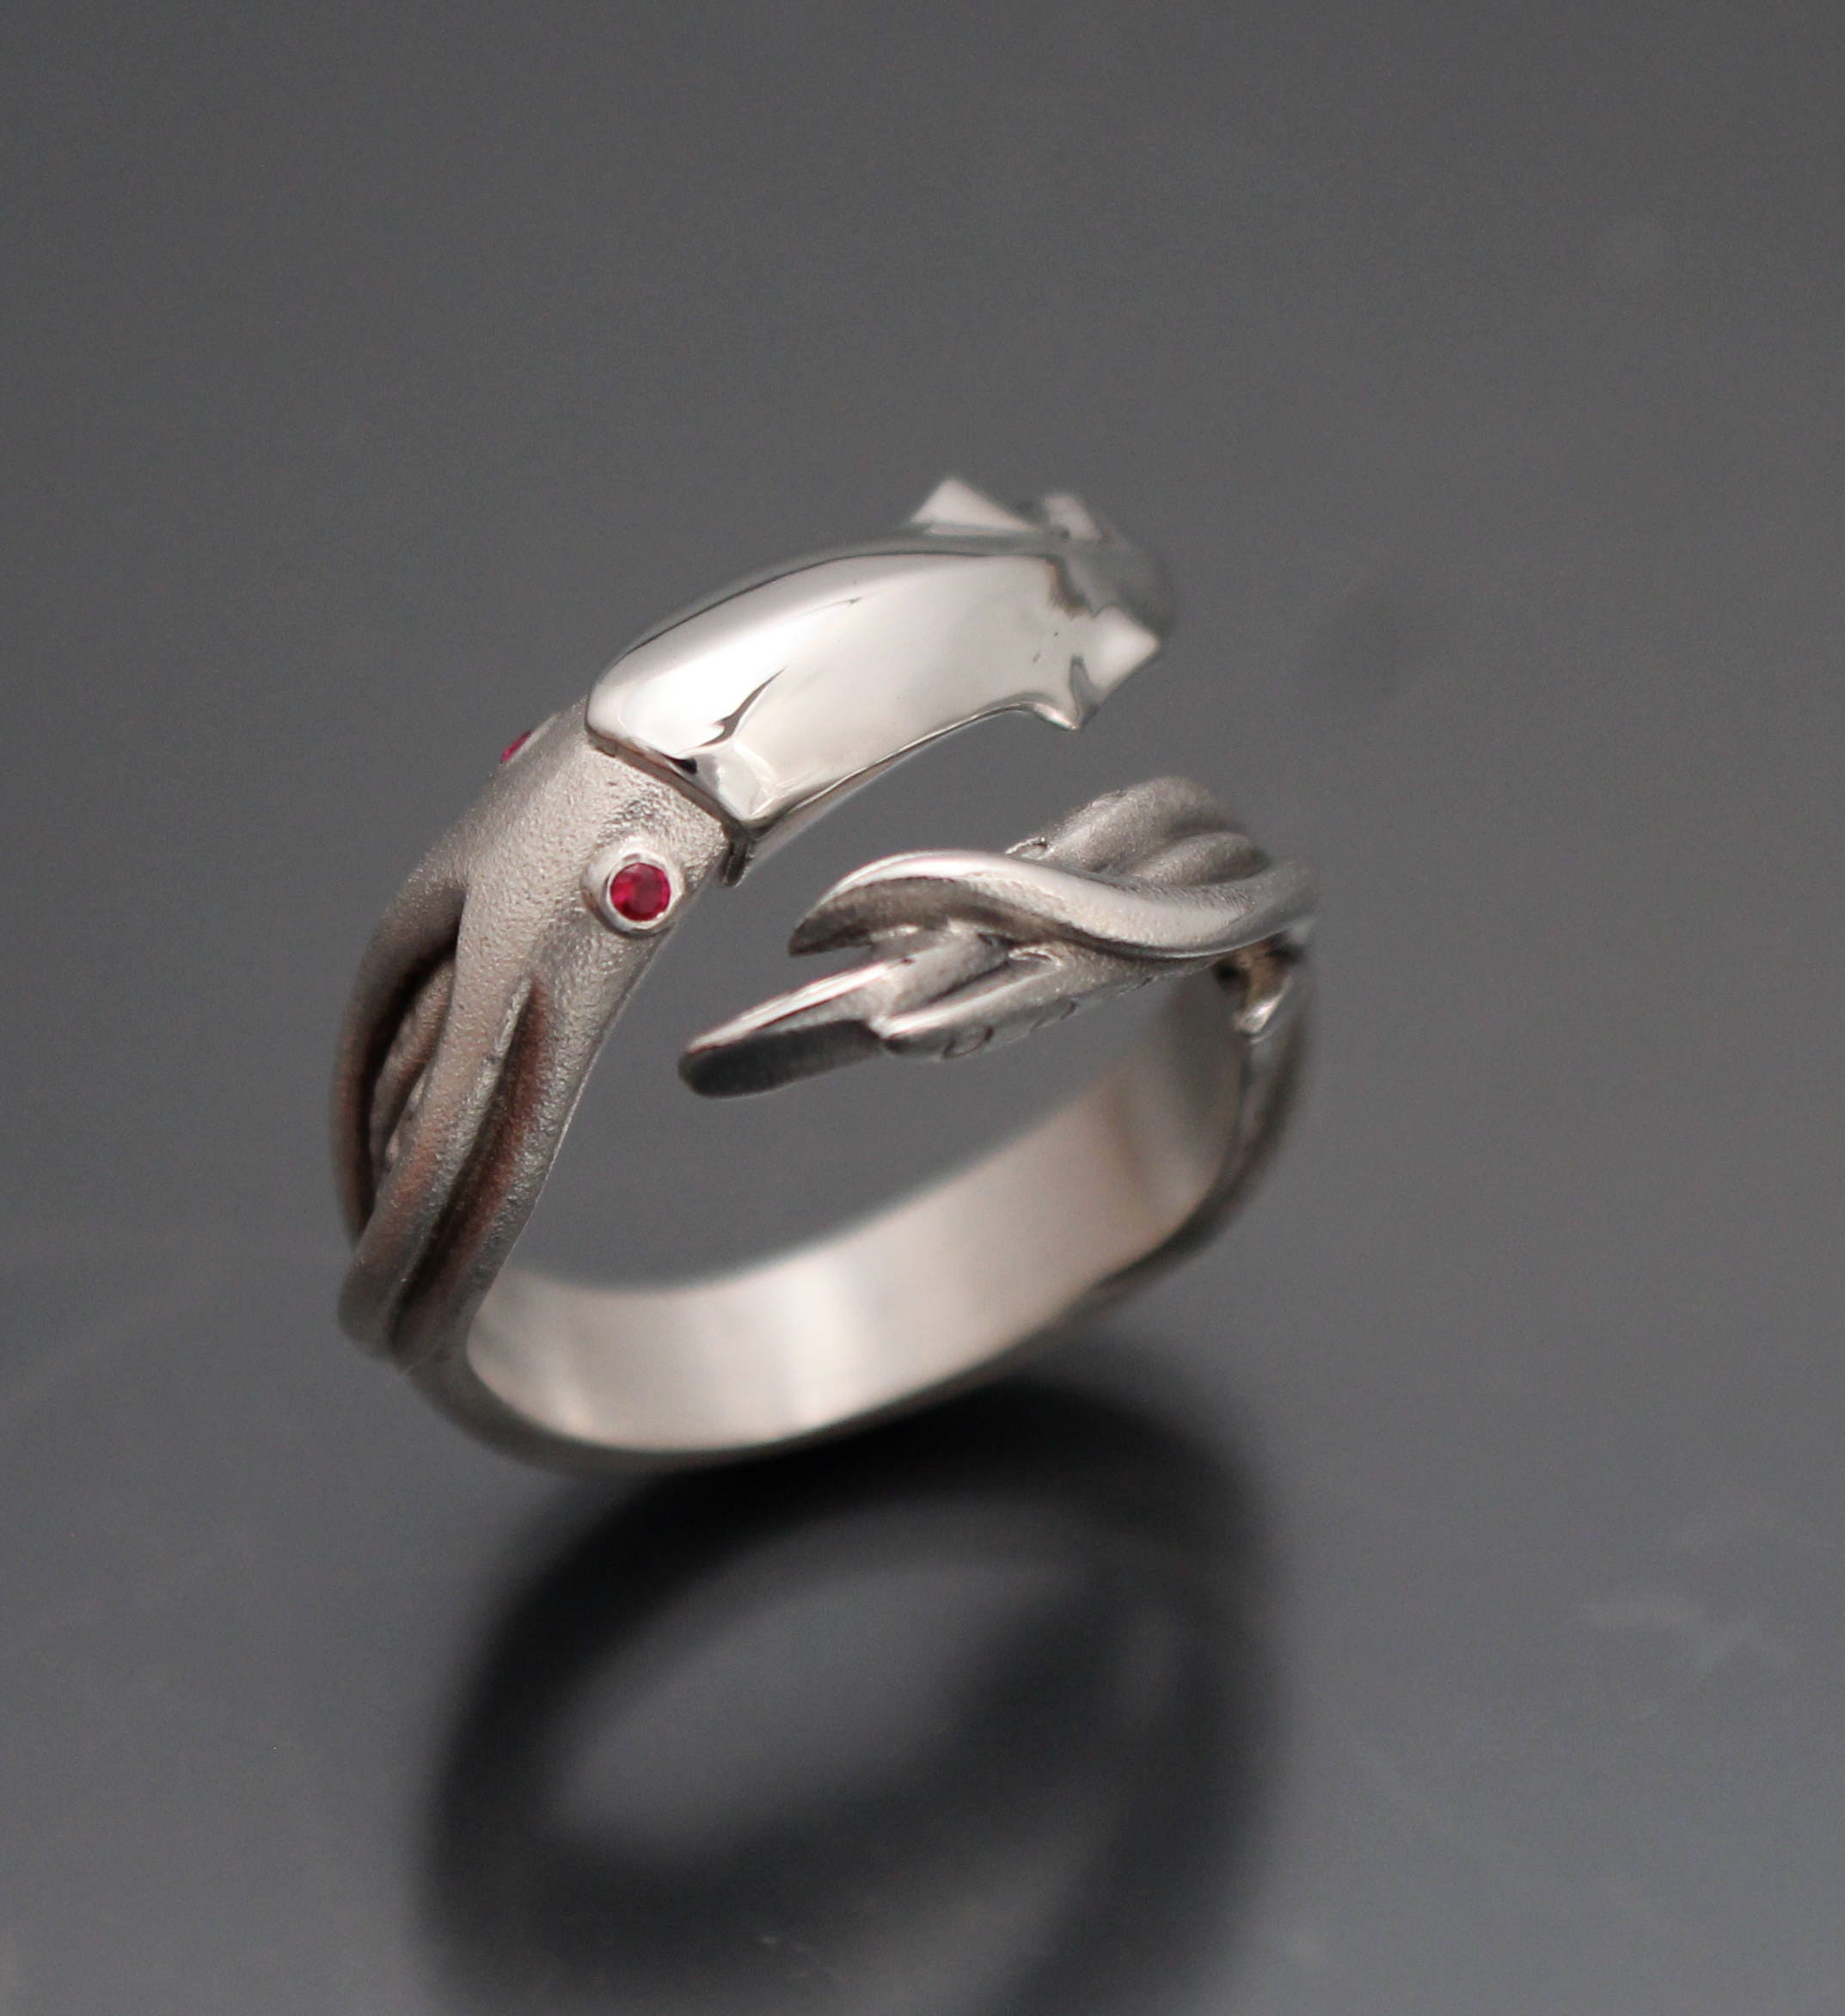 Stainless Steel Octopus Tentacle Squid Ring – My Passion for Jewelry